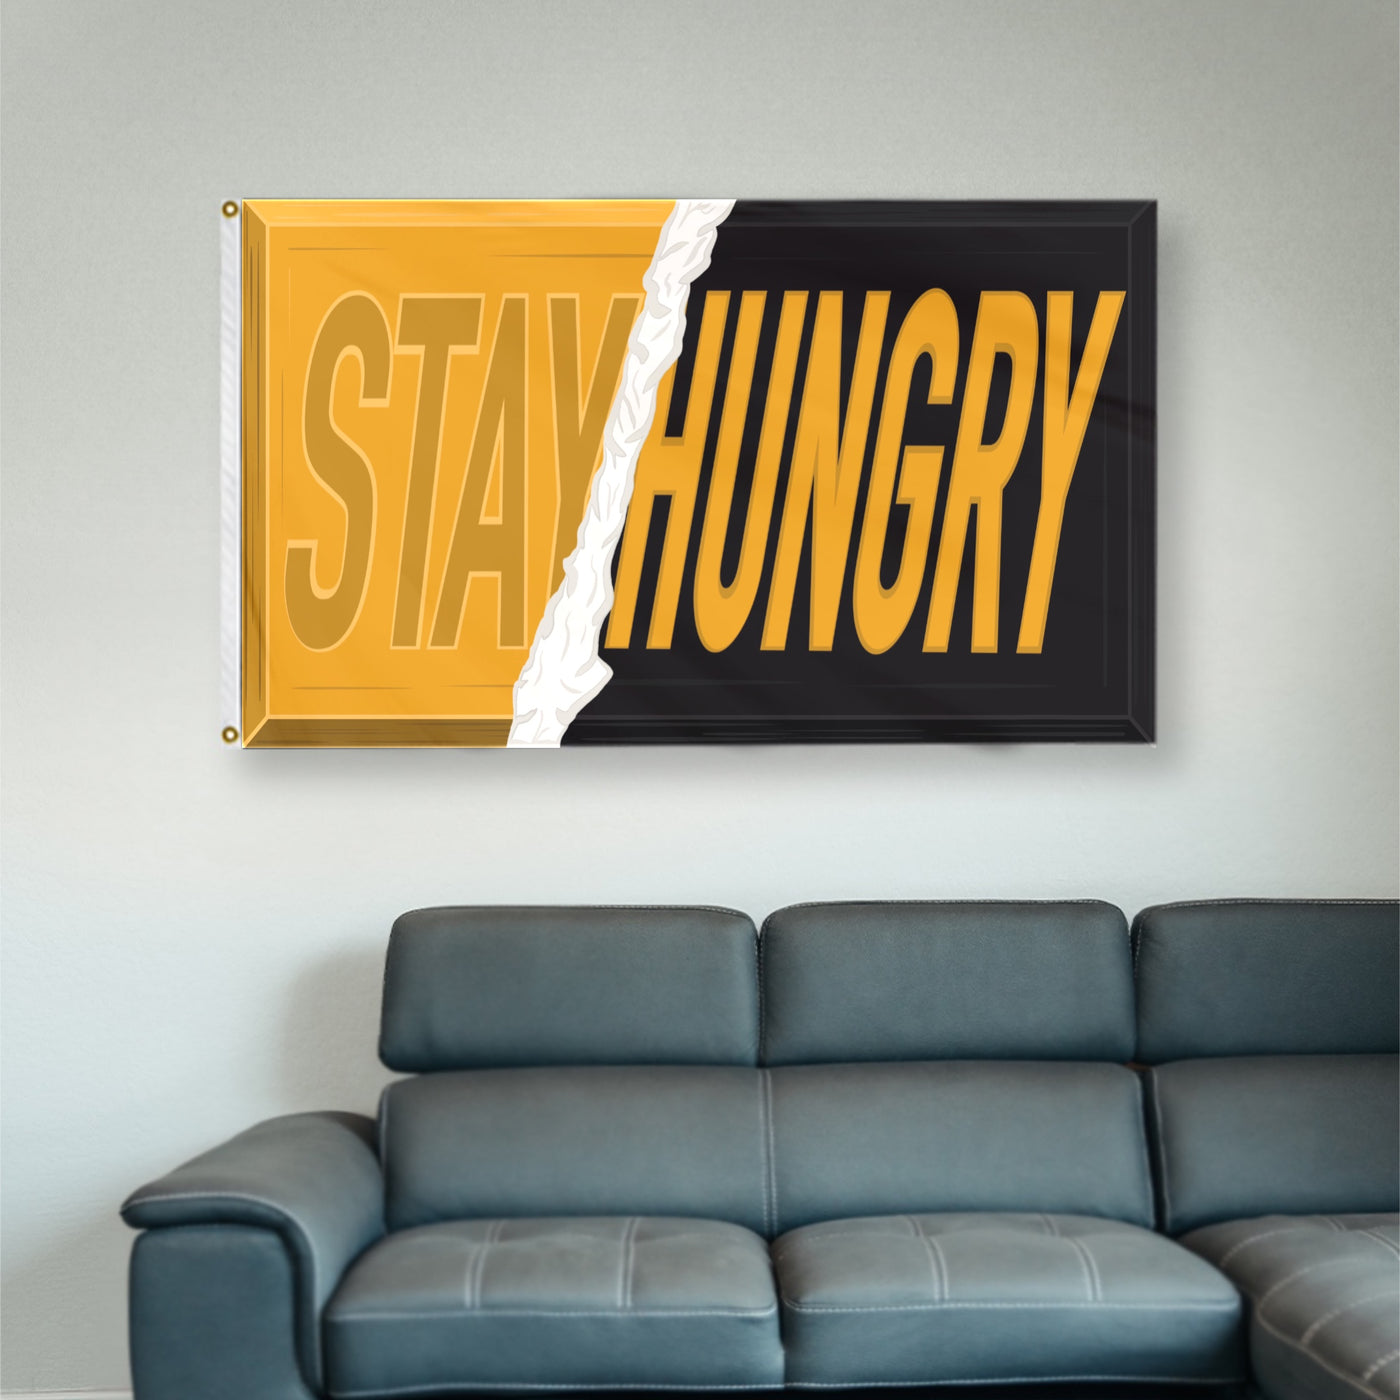 Stay Hungry Flag